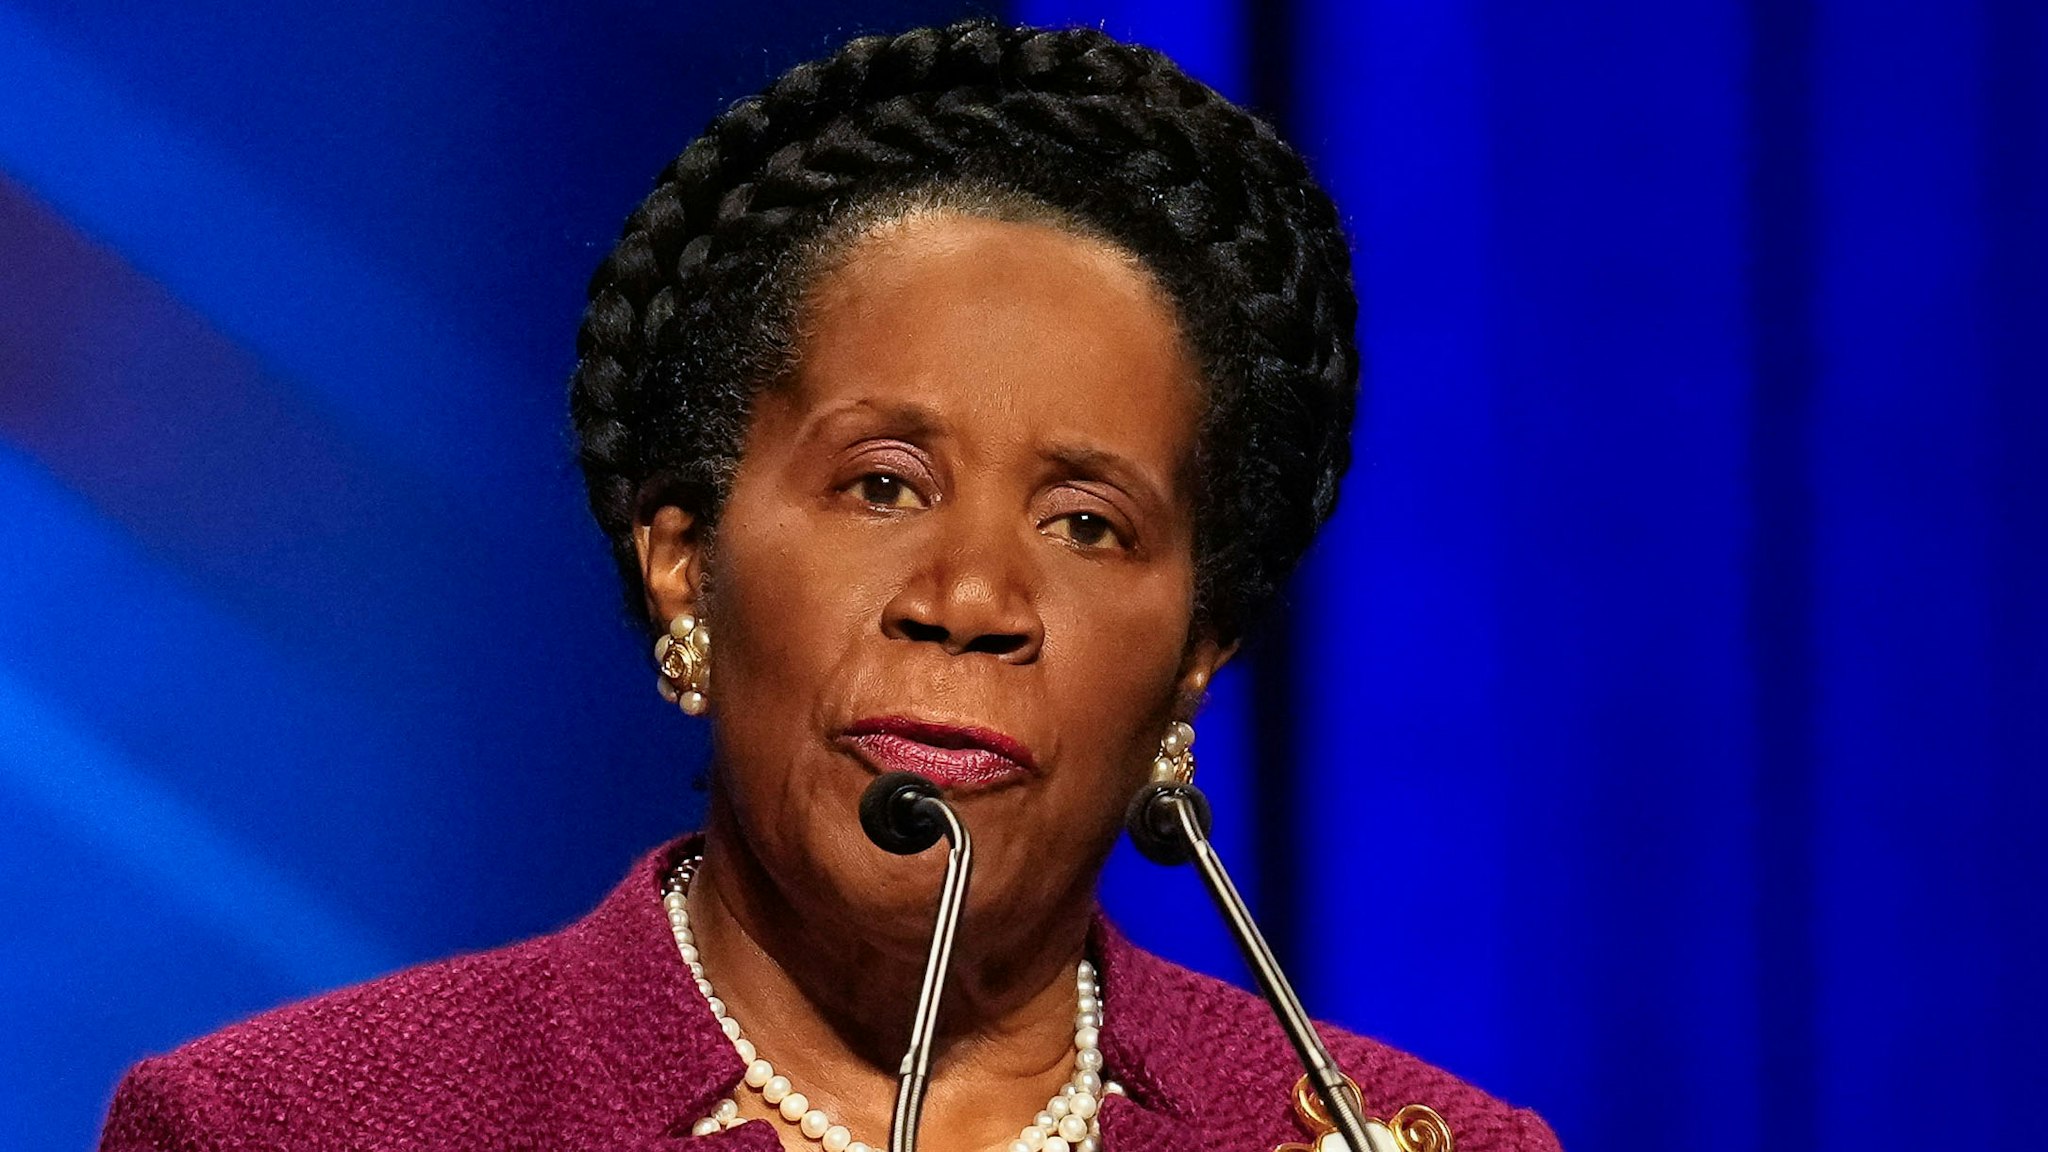 HOUSTON, TEXAS - OCTOBER 10: Houston mayoral candidate and U.S. Rep. Sheila Jackson Lee answering a question during a debate hosted by KPRC, Telemundo and the League of Women Voters on Tuesday, Oct. 10, 2023 at Houston Christian University in Houston.